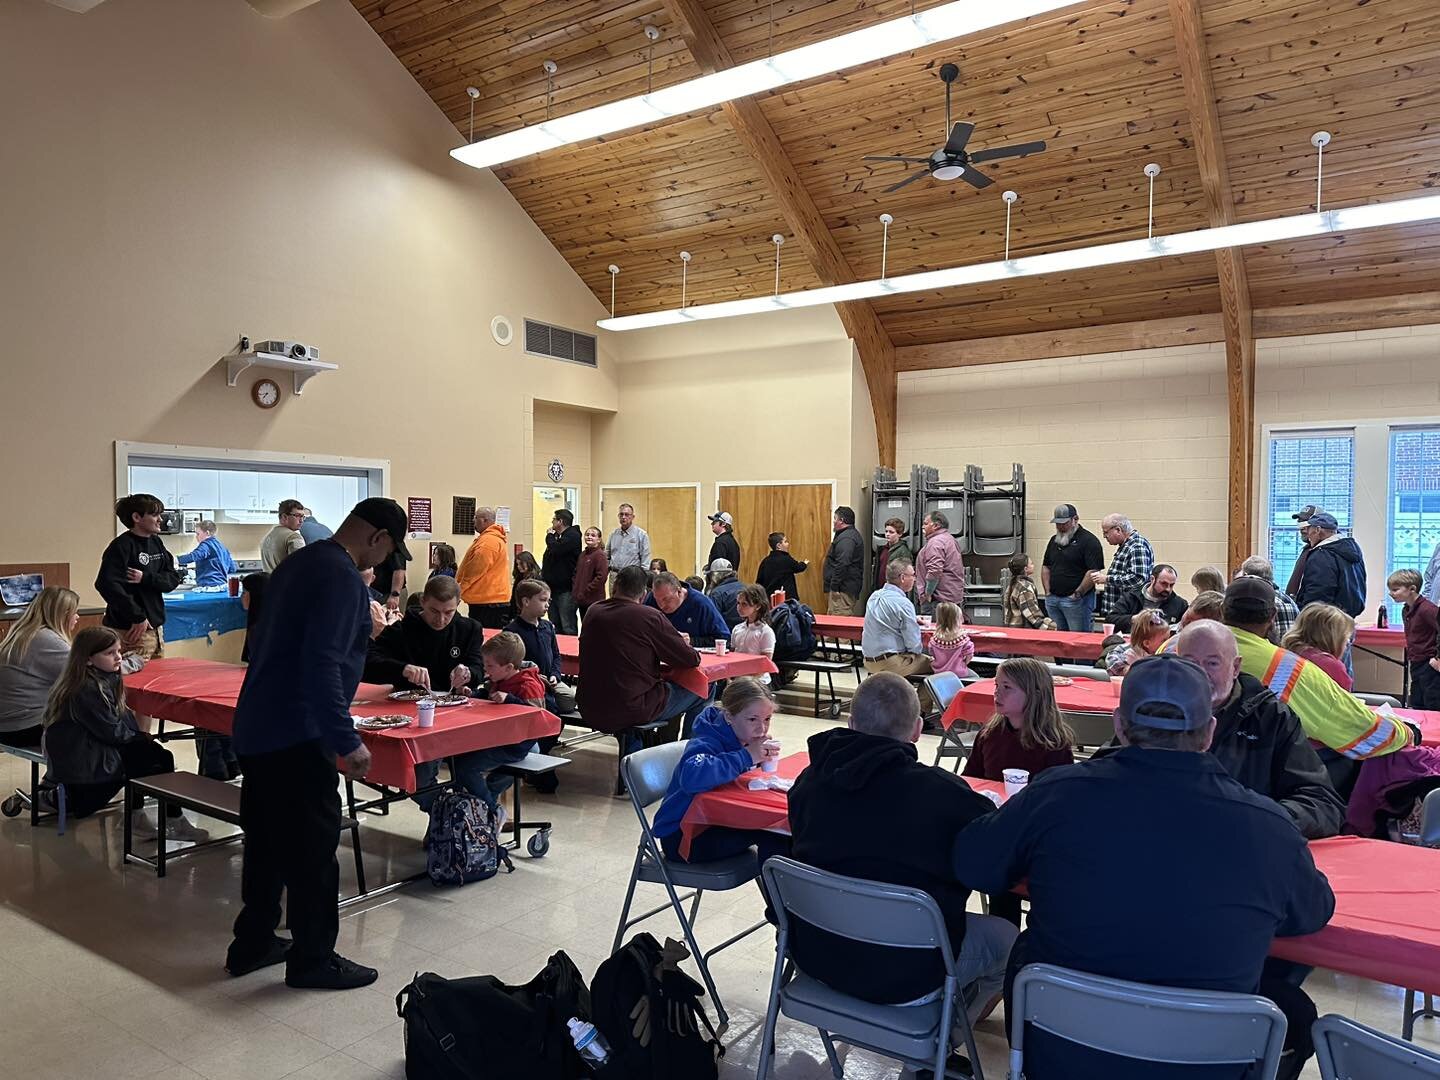 Pancakes with pops had an amazing turn out! 🍳🥞 This special occasion was a fantastic opportunity for fathers and grandfathers to have breakfast with their students before the work and school day began. They kicked off the day with good food, smiles